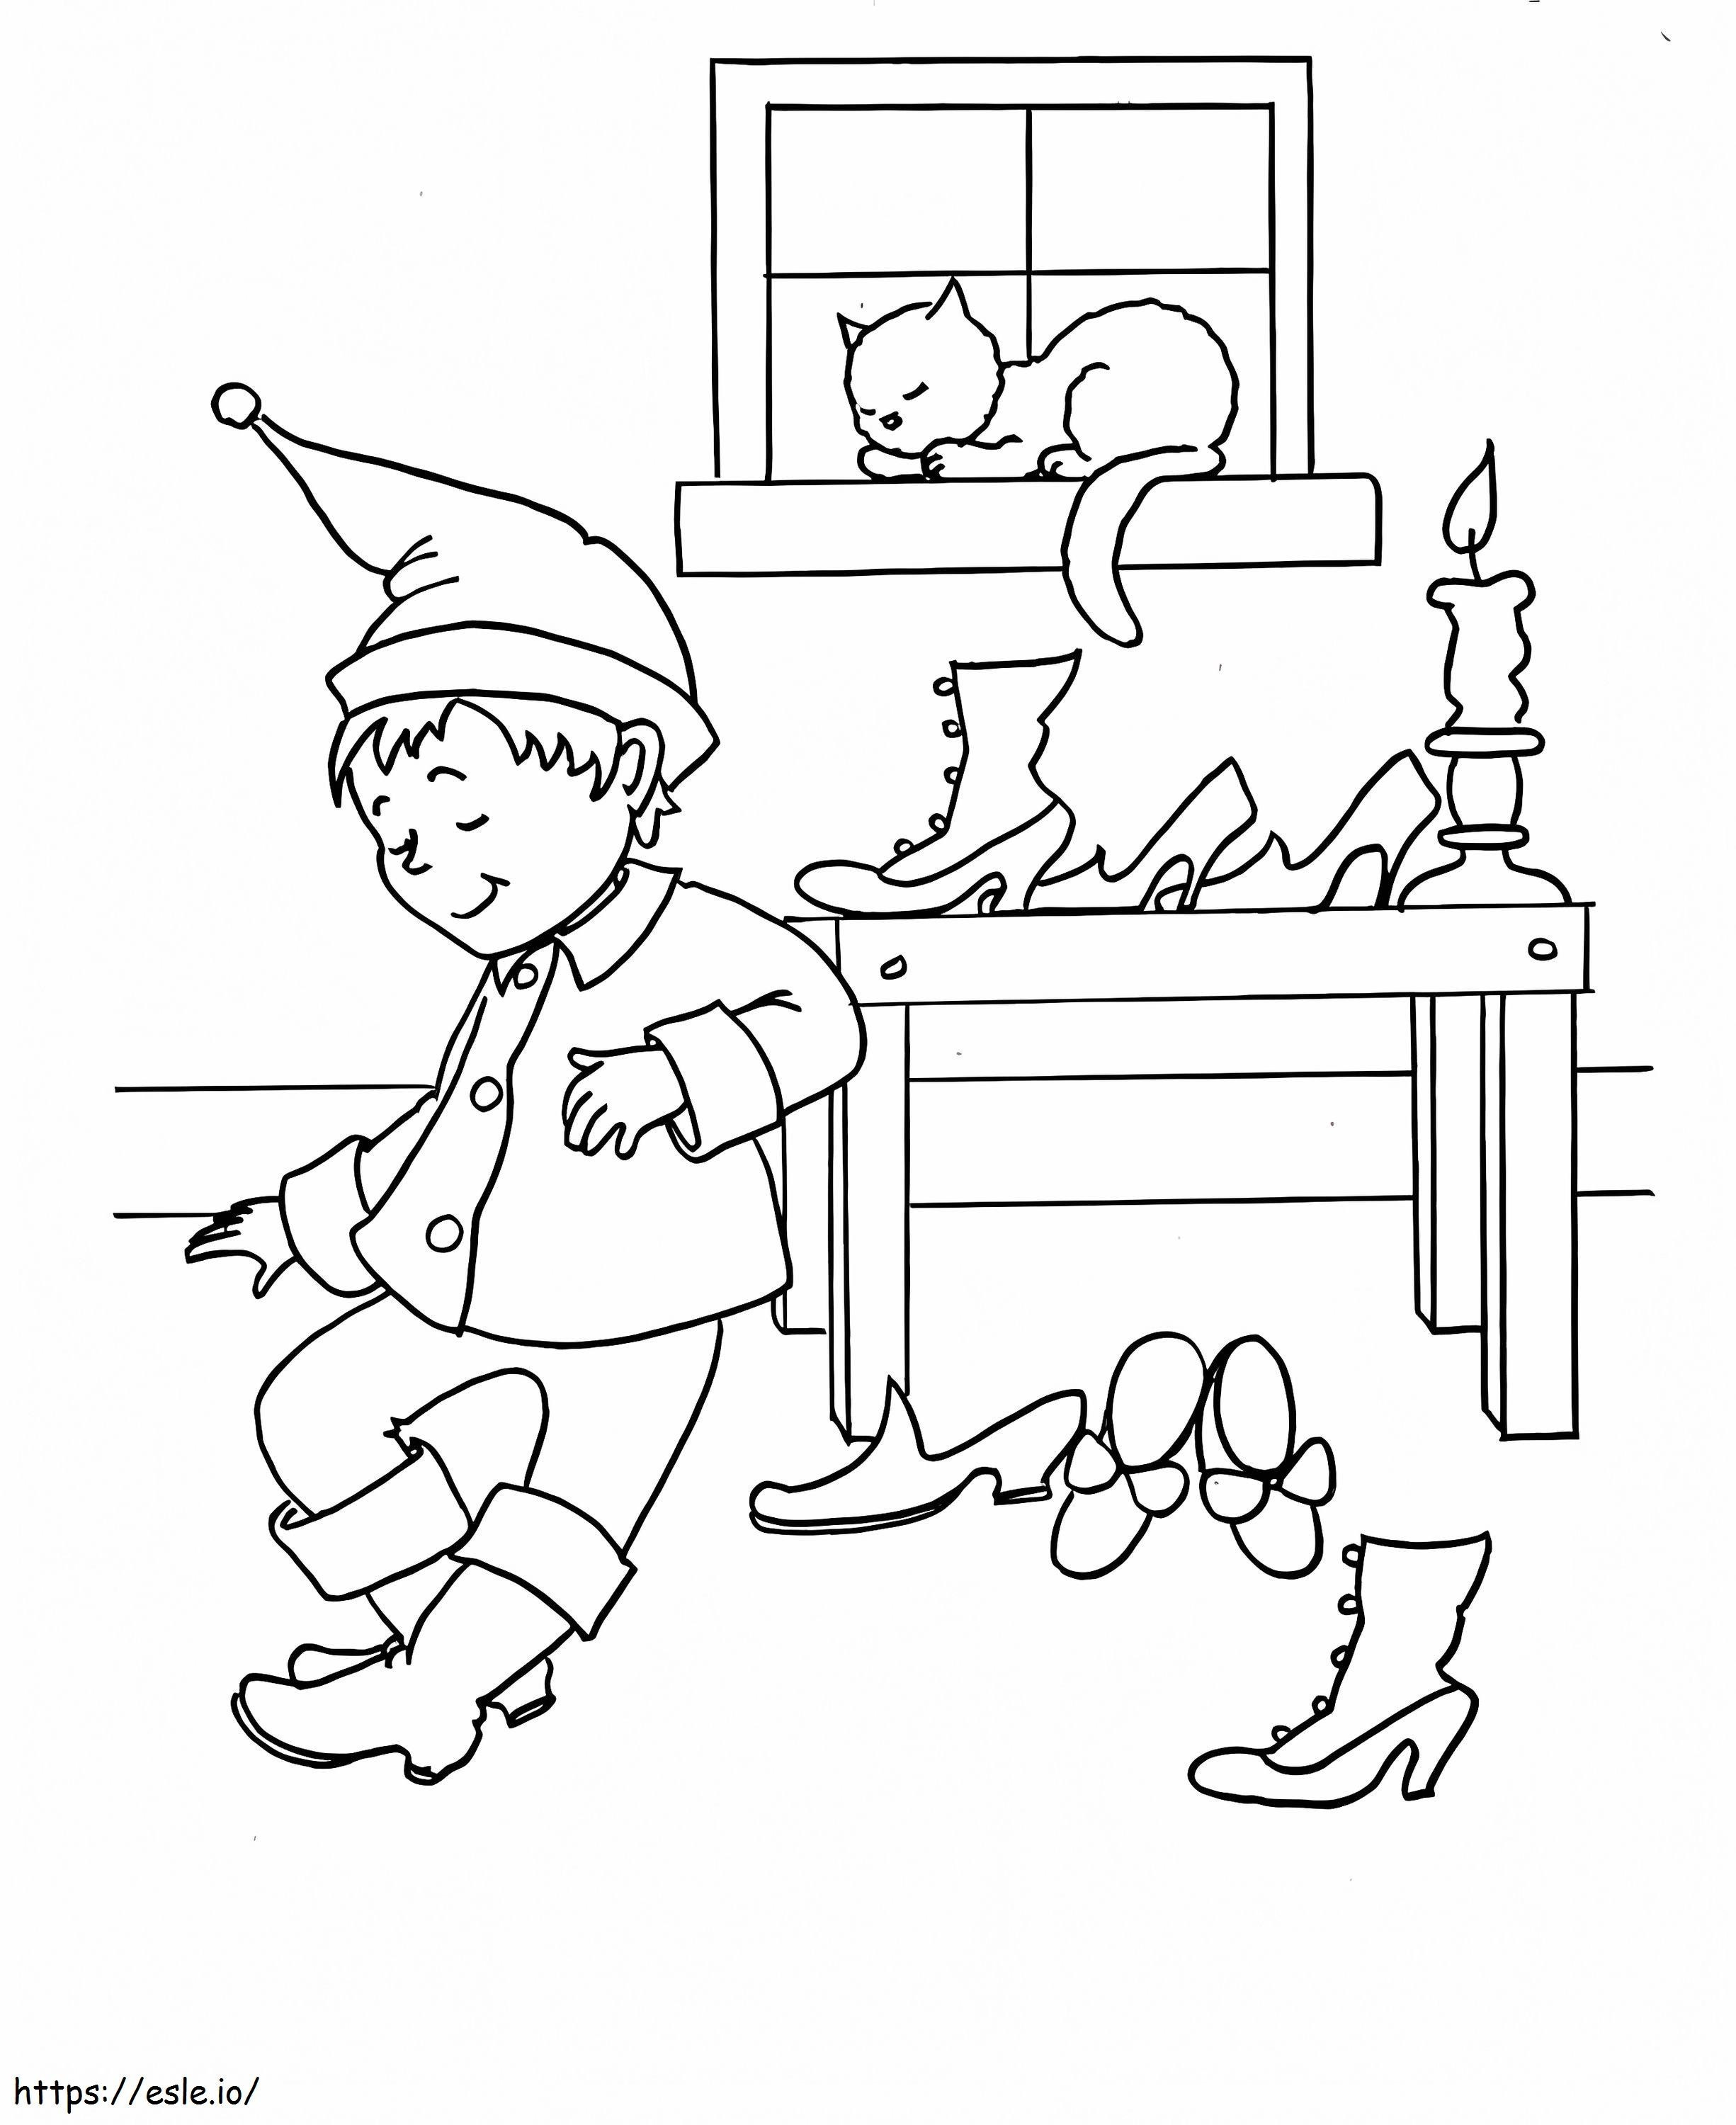 Lovely Elf coloring page